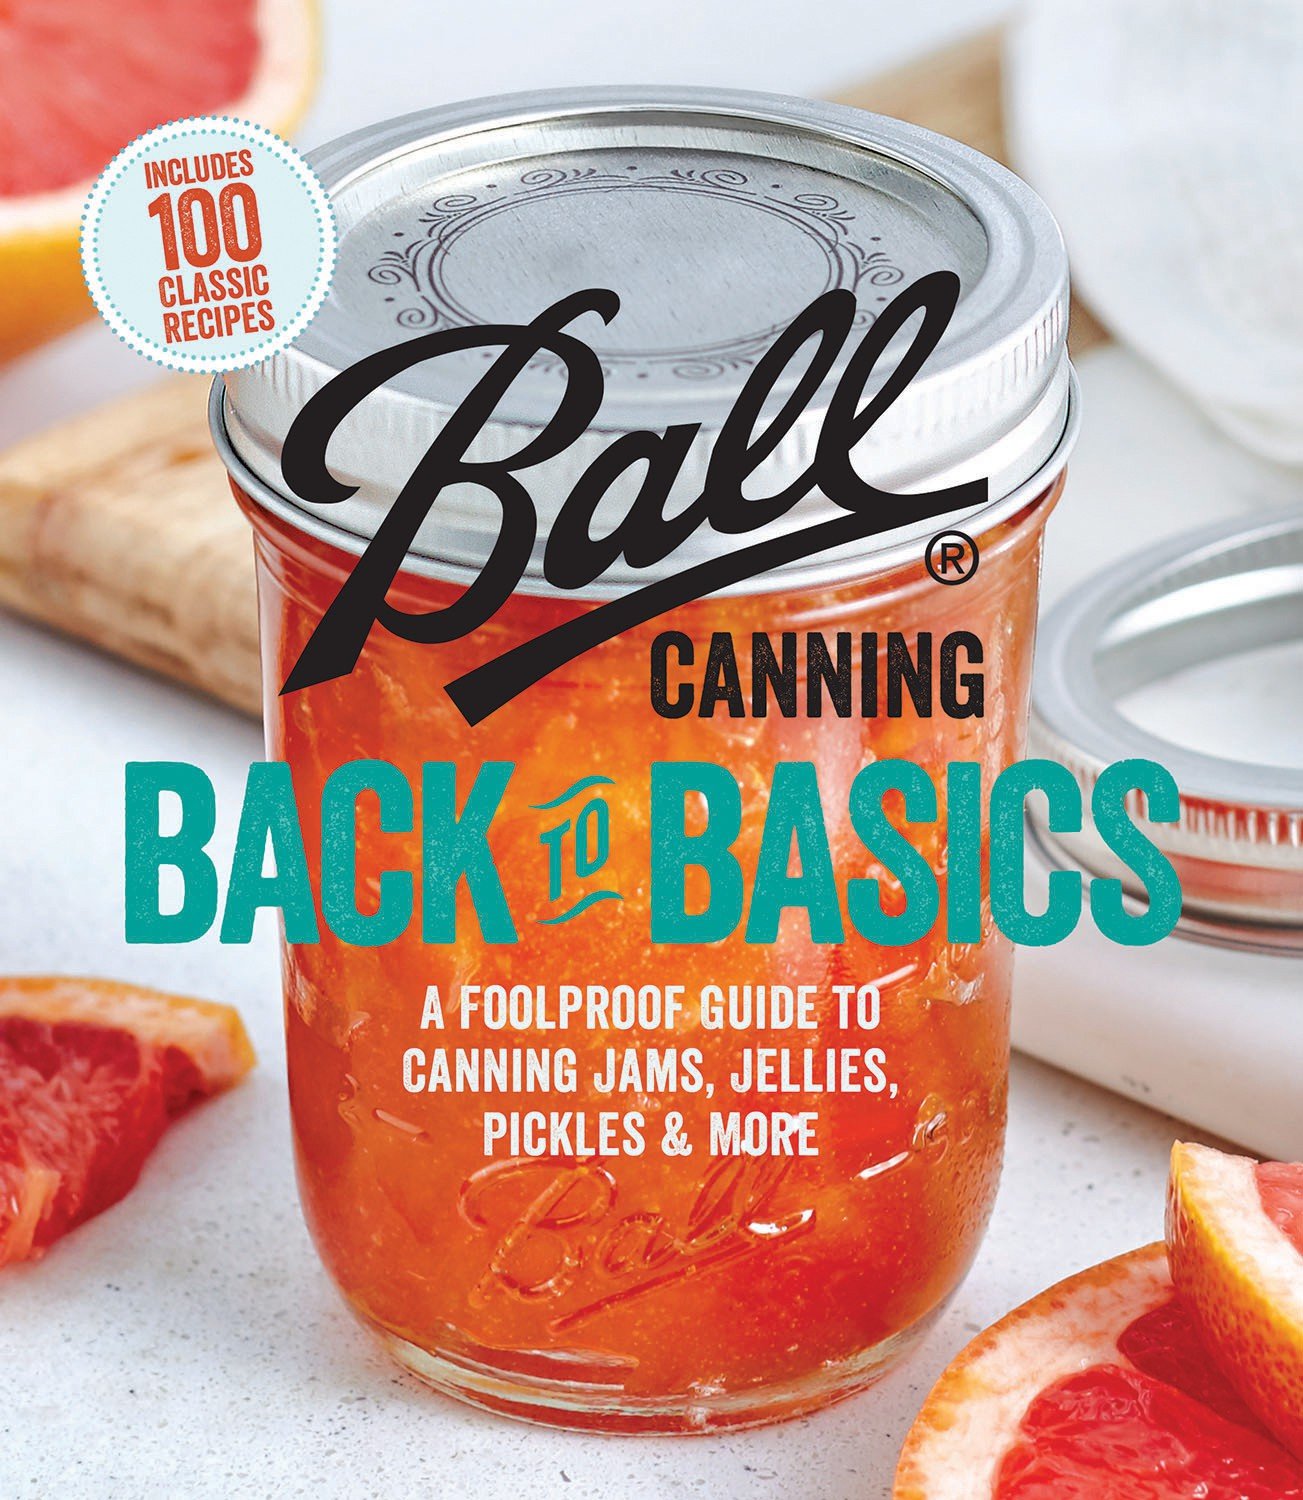 Ball Canning Back to Basics A Foolproof Guide to Canning Jams, Jellies